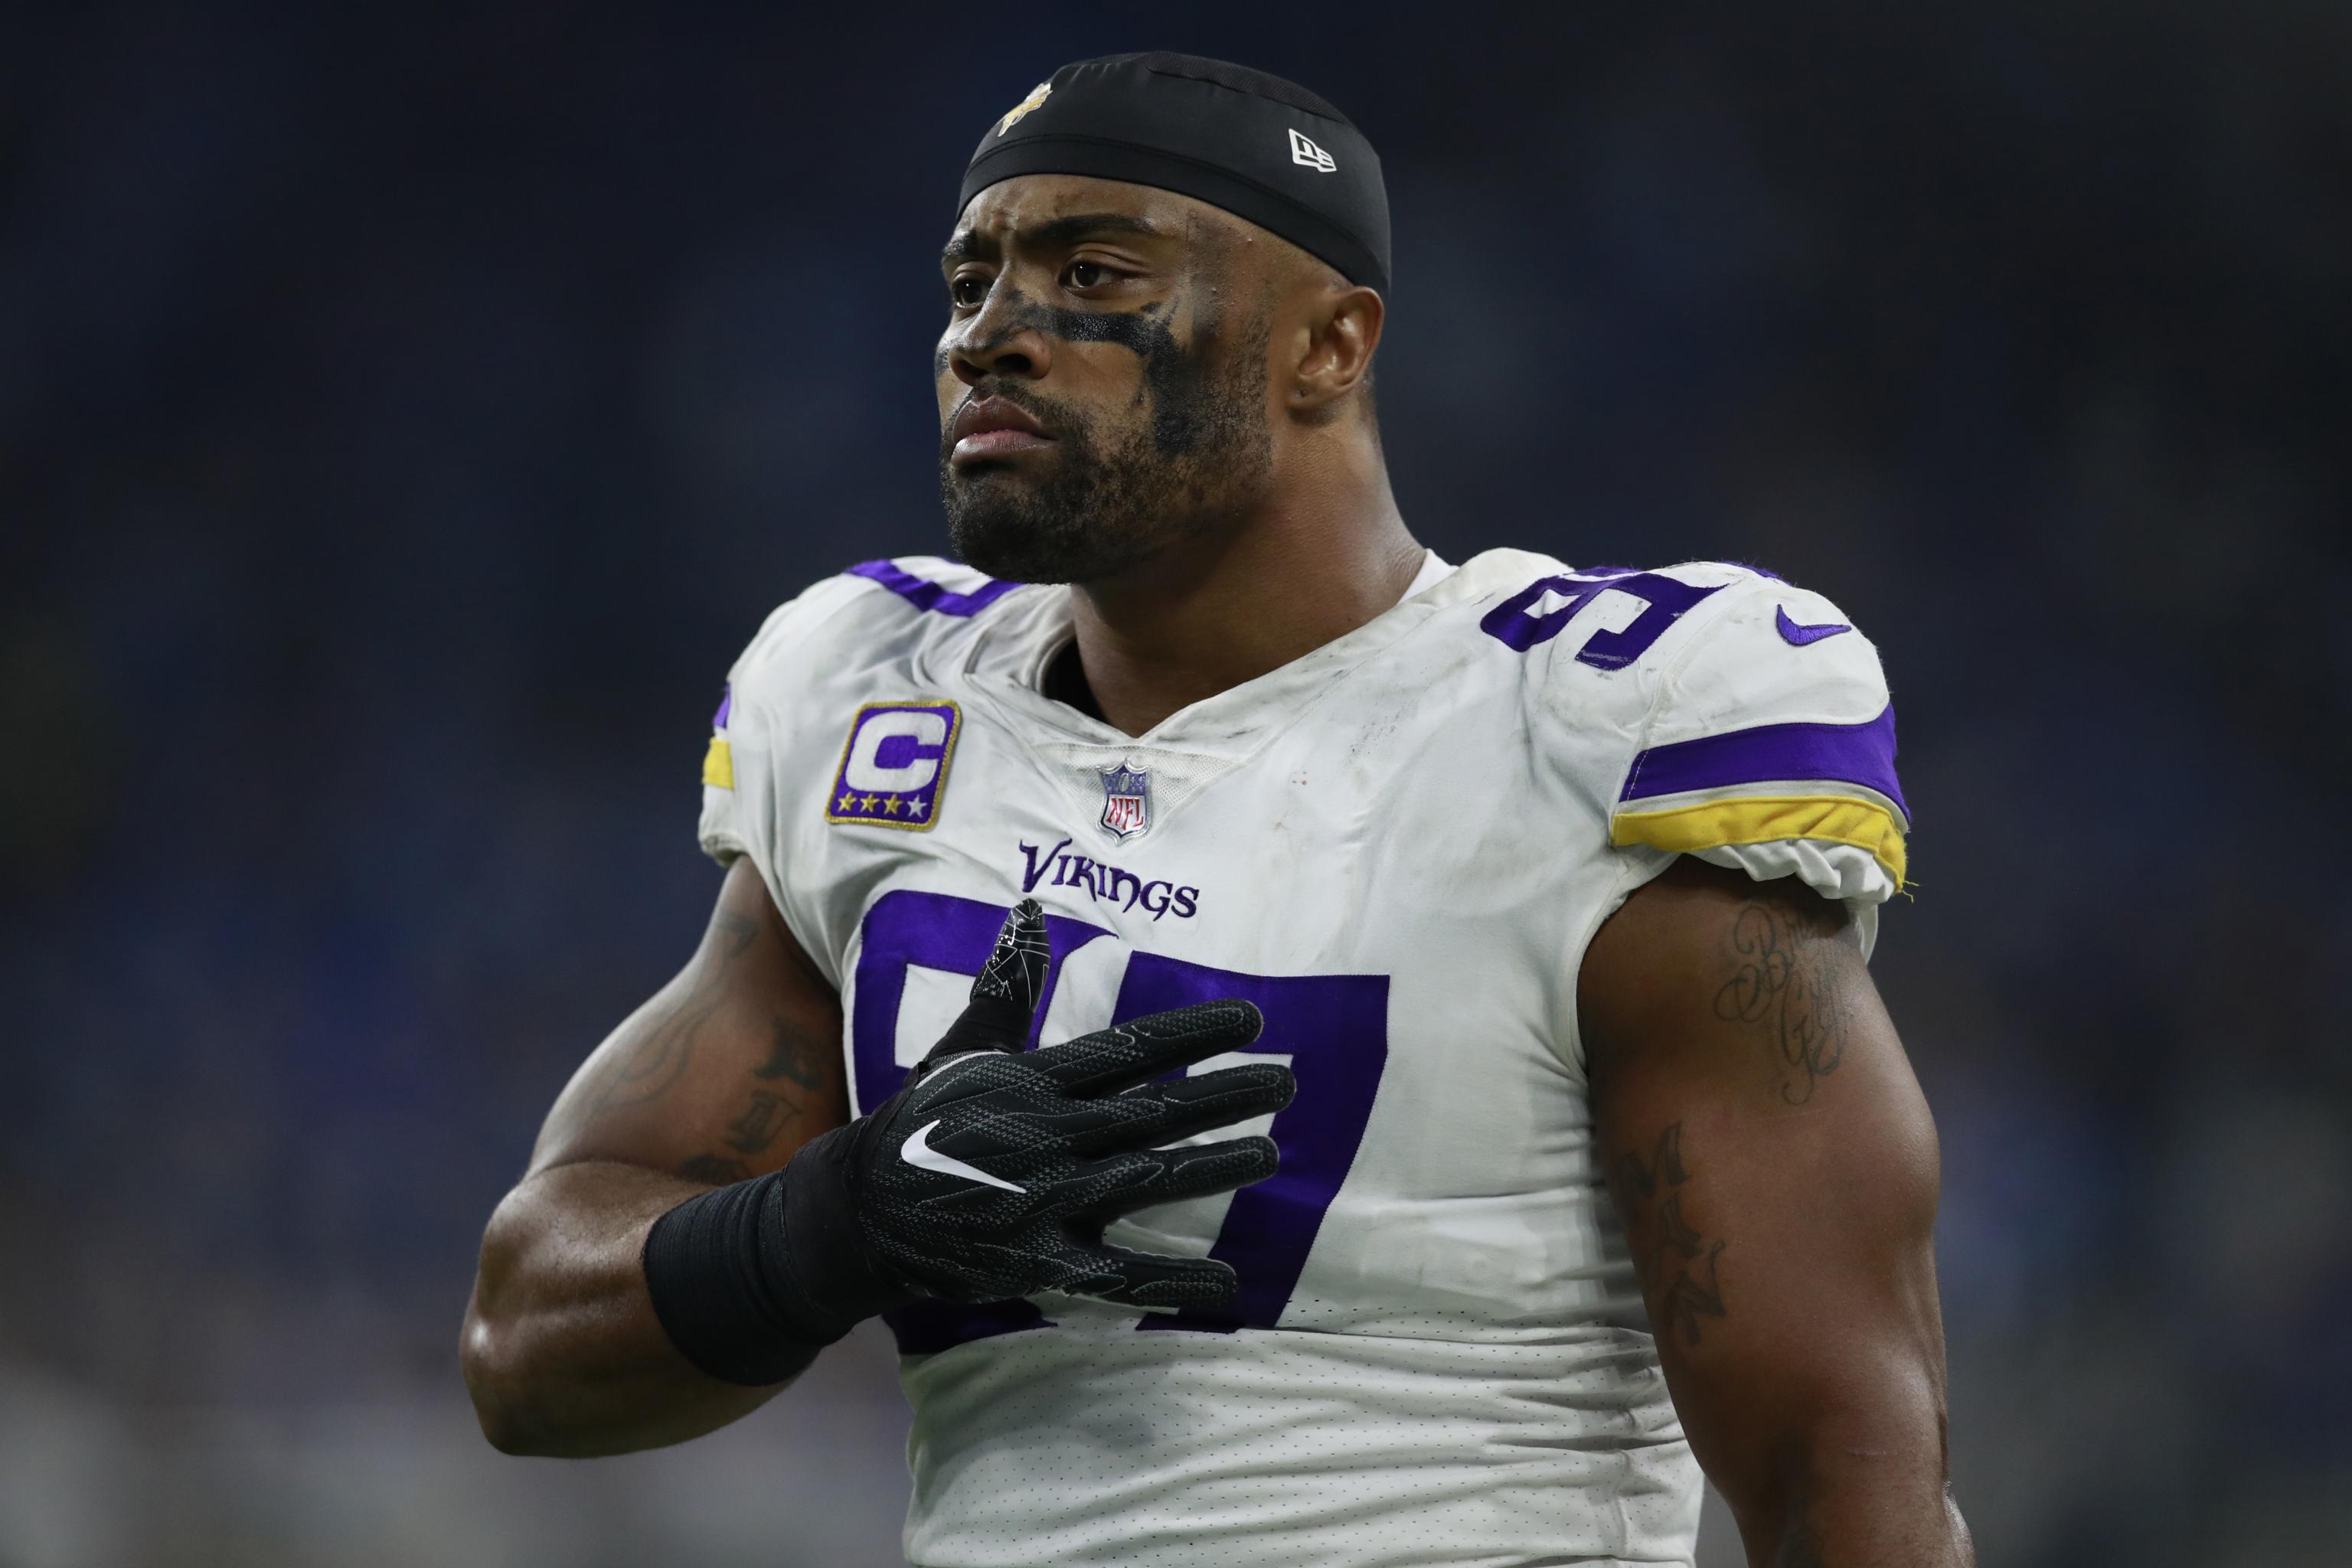 Vikings' Everson Griffen 'doing great' now, wants to play again in